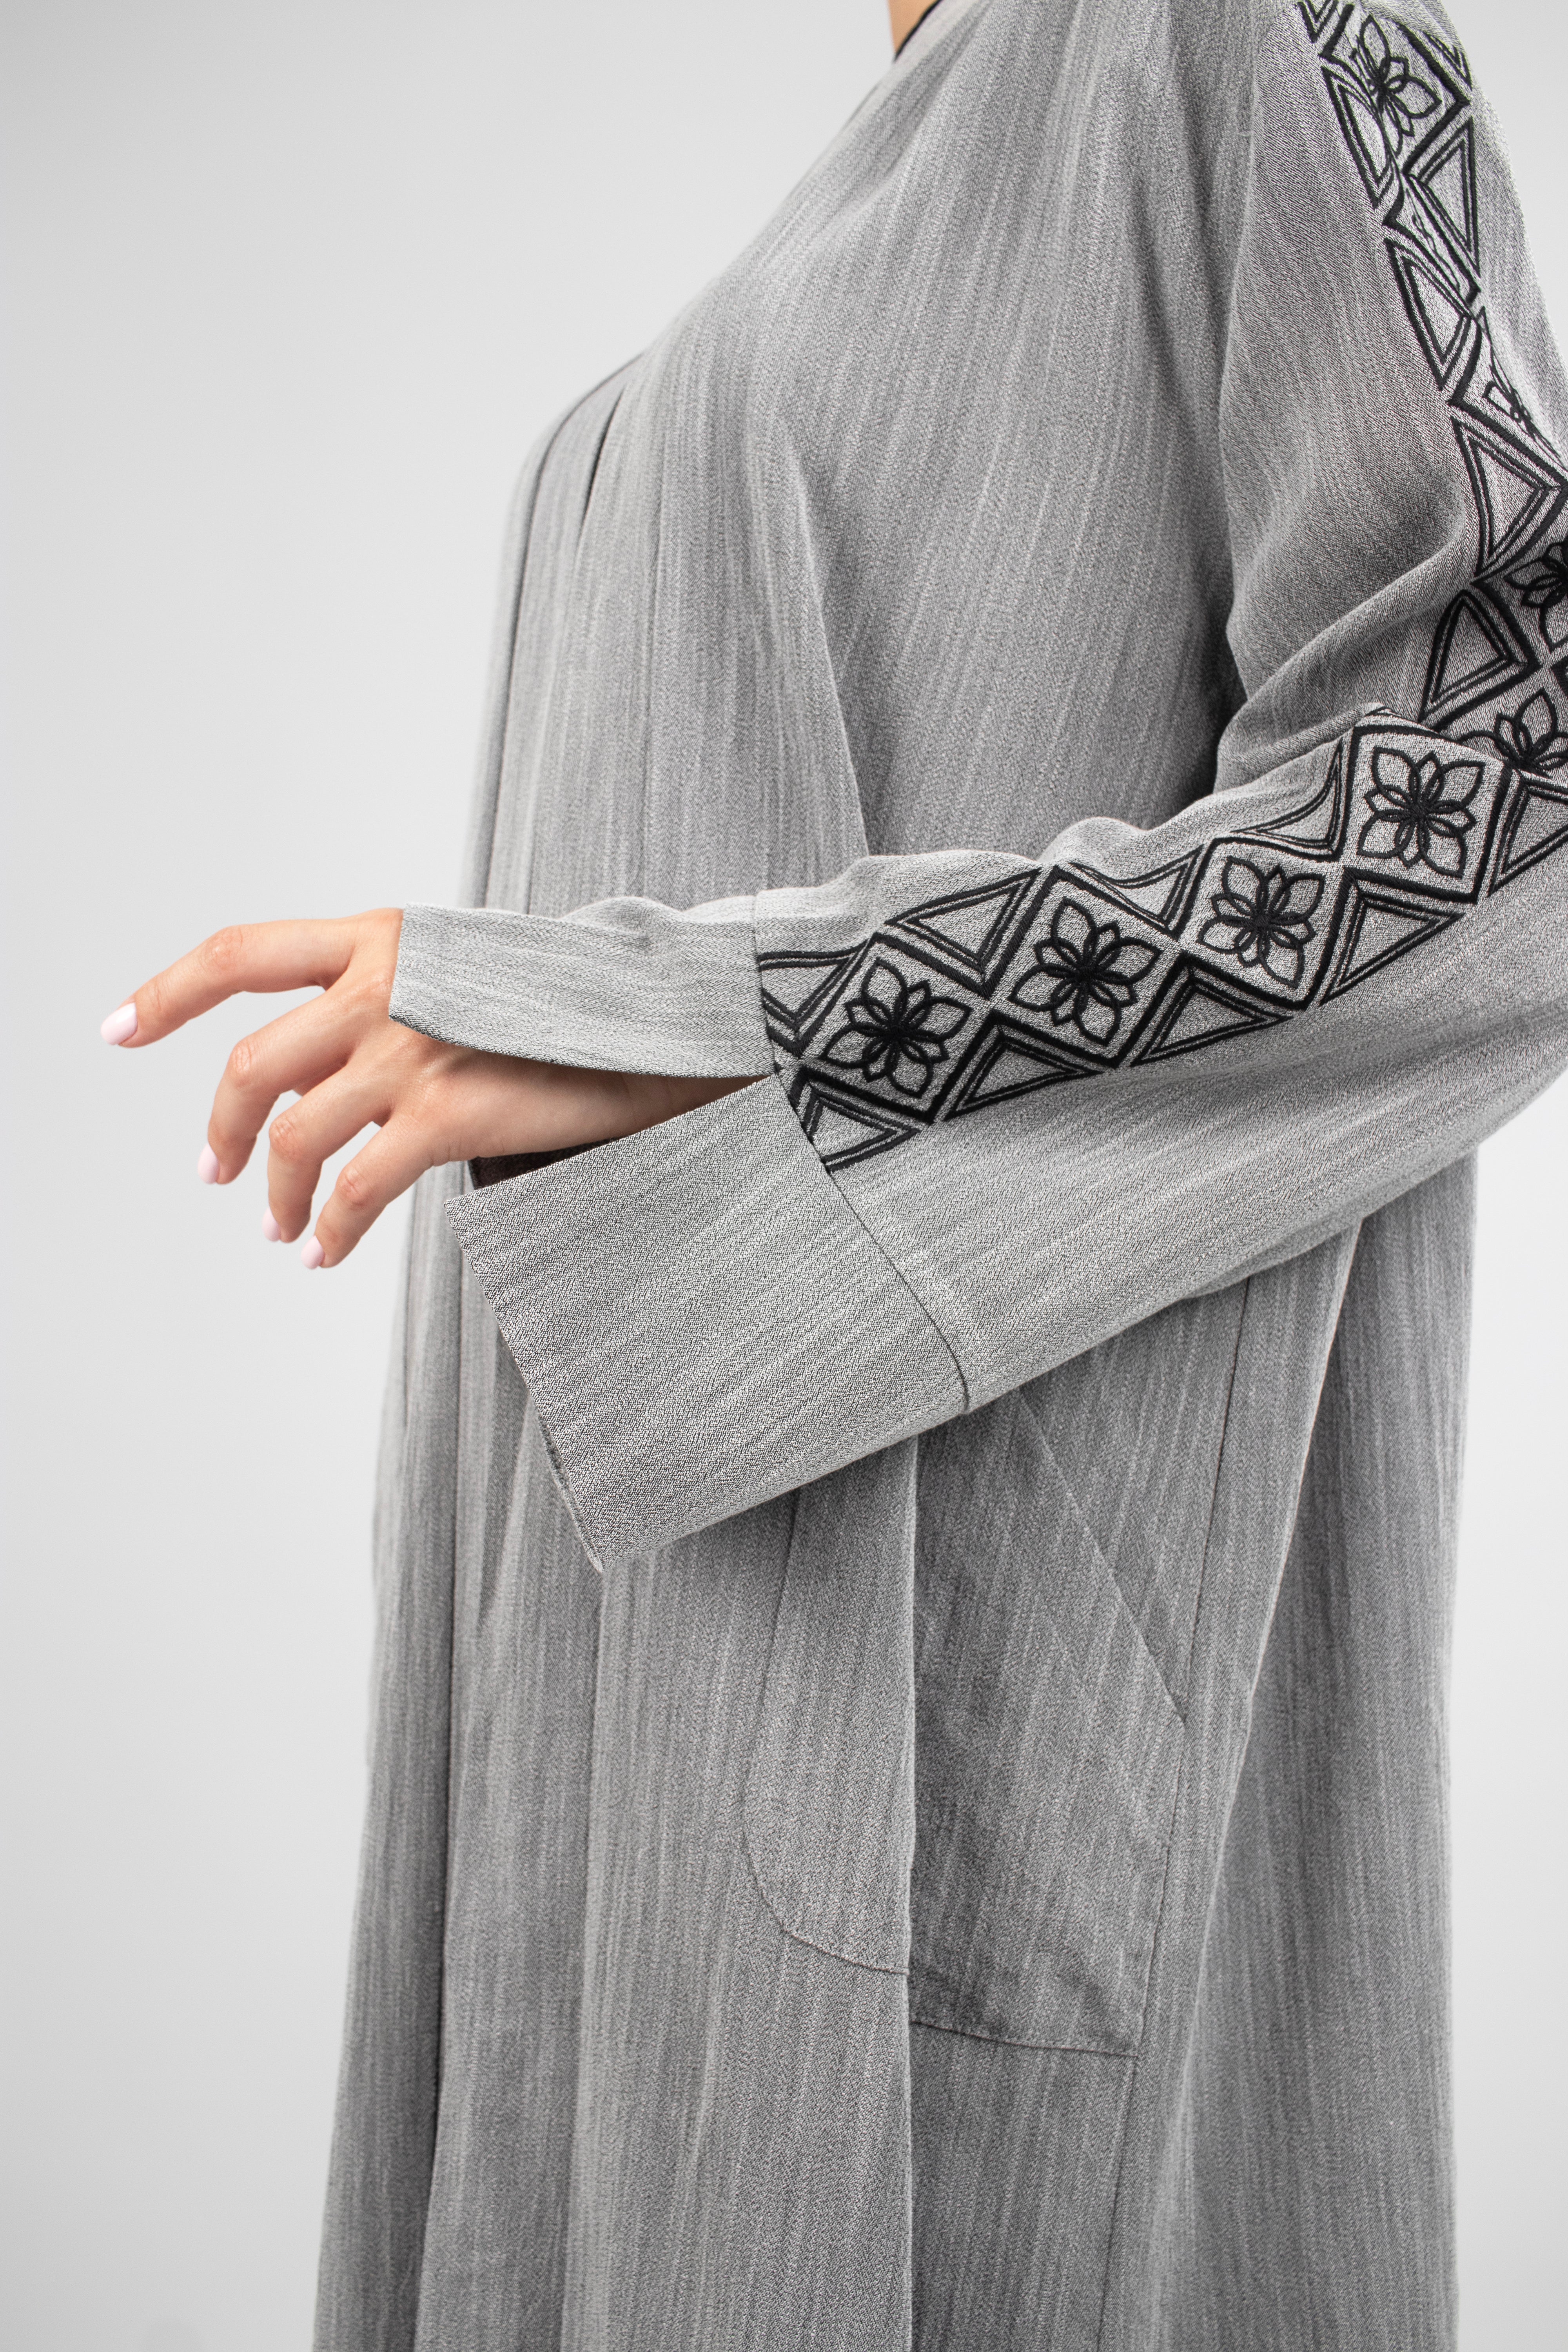 CA - Embroidered Sleeve Abaya - Sterling